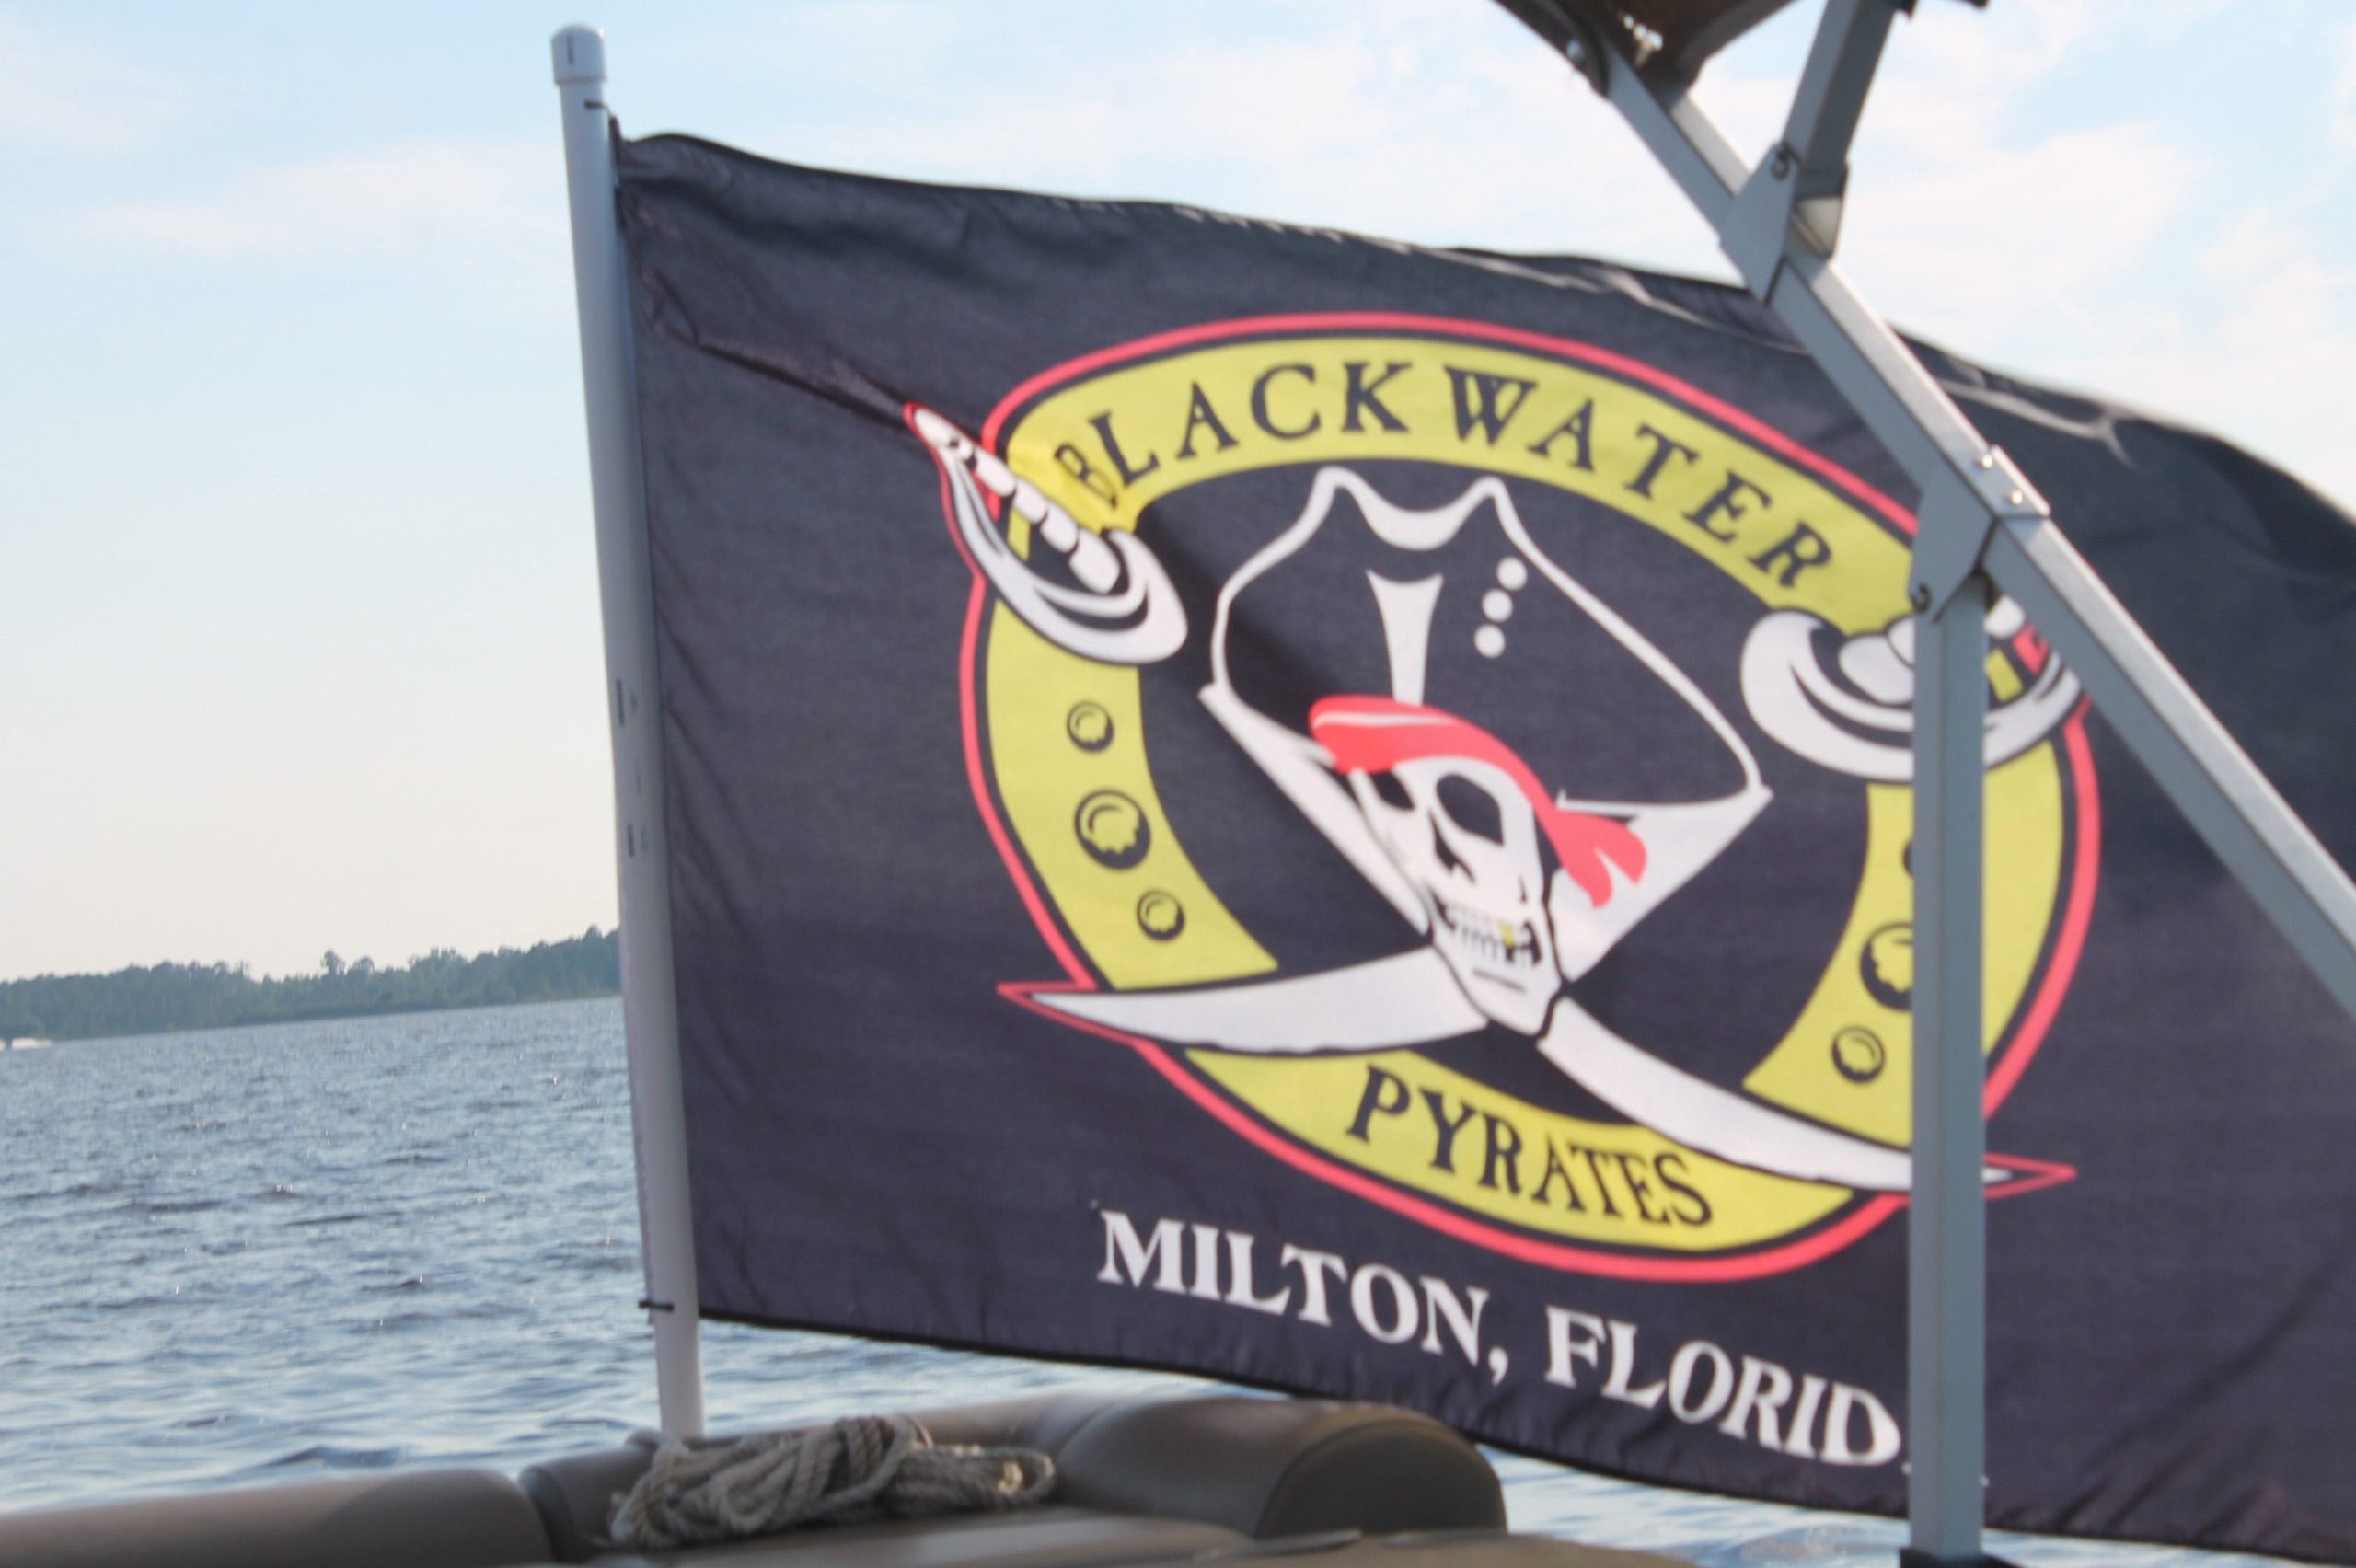 The Blackwater Pyrates flag flies in the bay breeze. [FILE PHOTO]